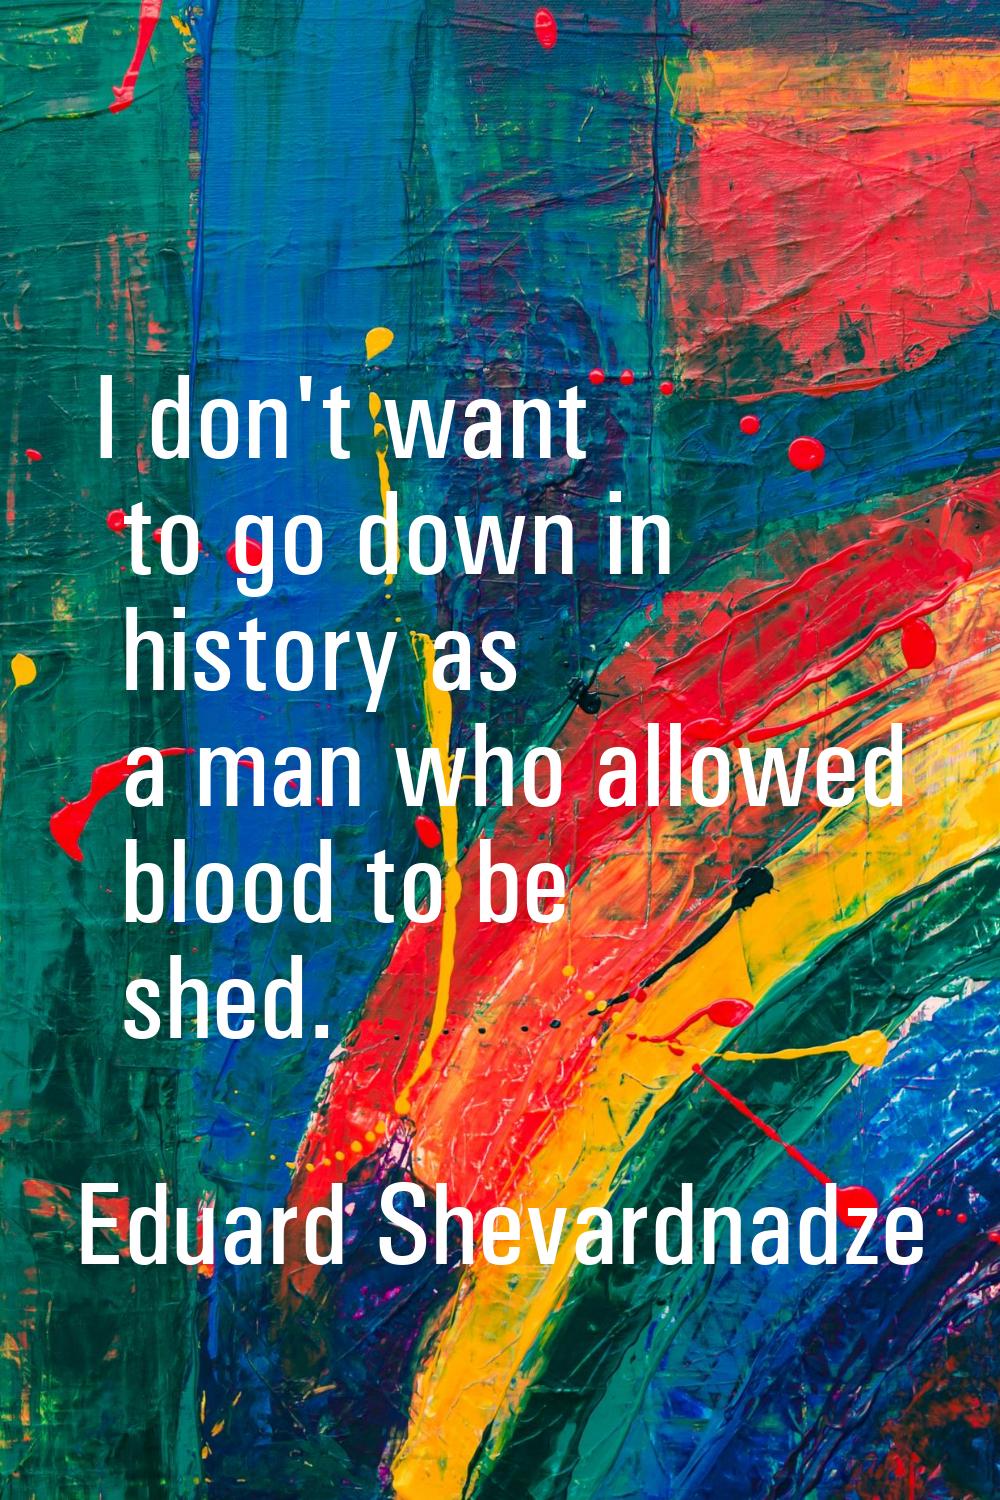 I don't want to go down in history as a man who allowed blood to be shed.